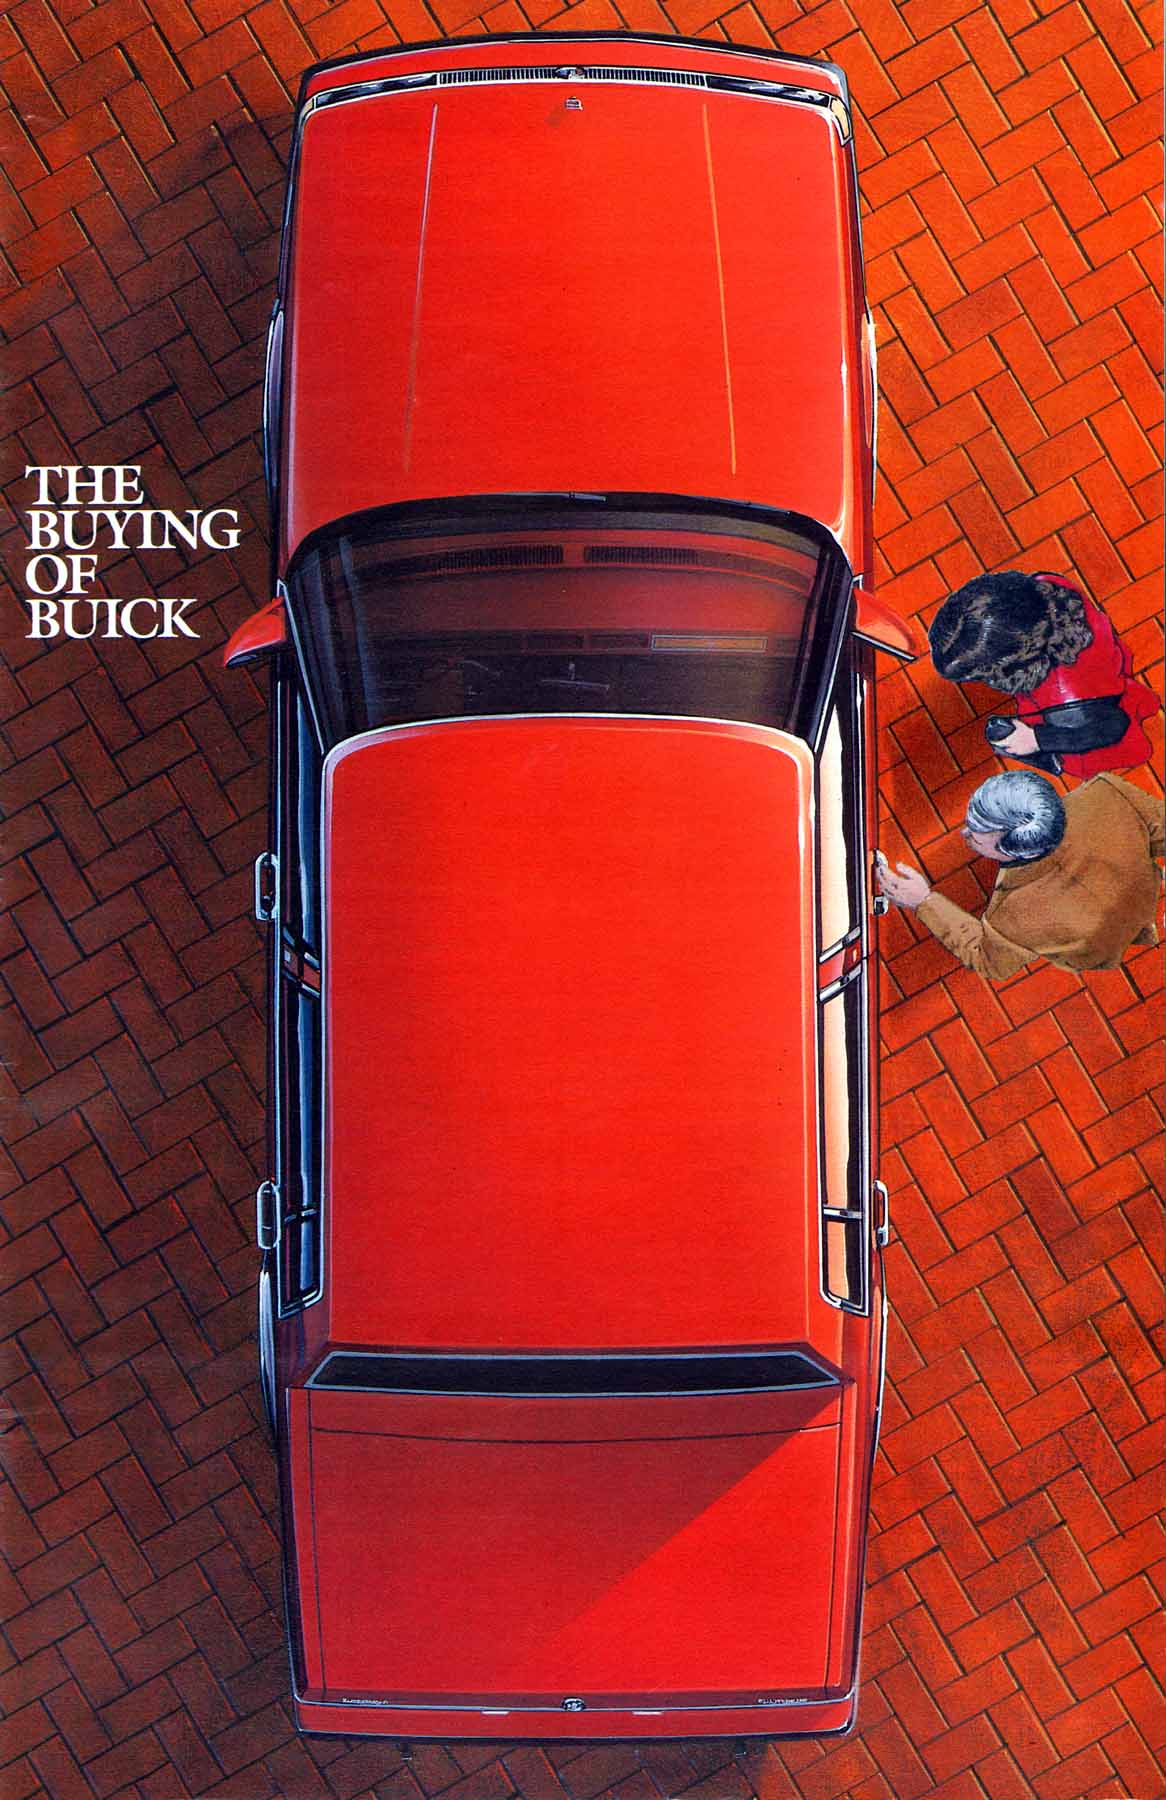 1985 The Buying of Buick-01